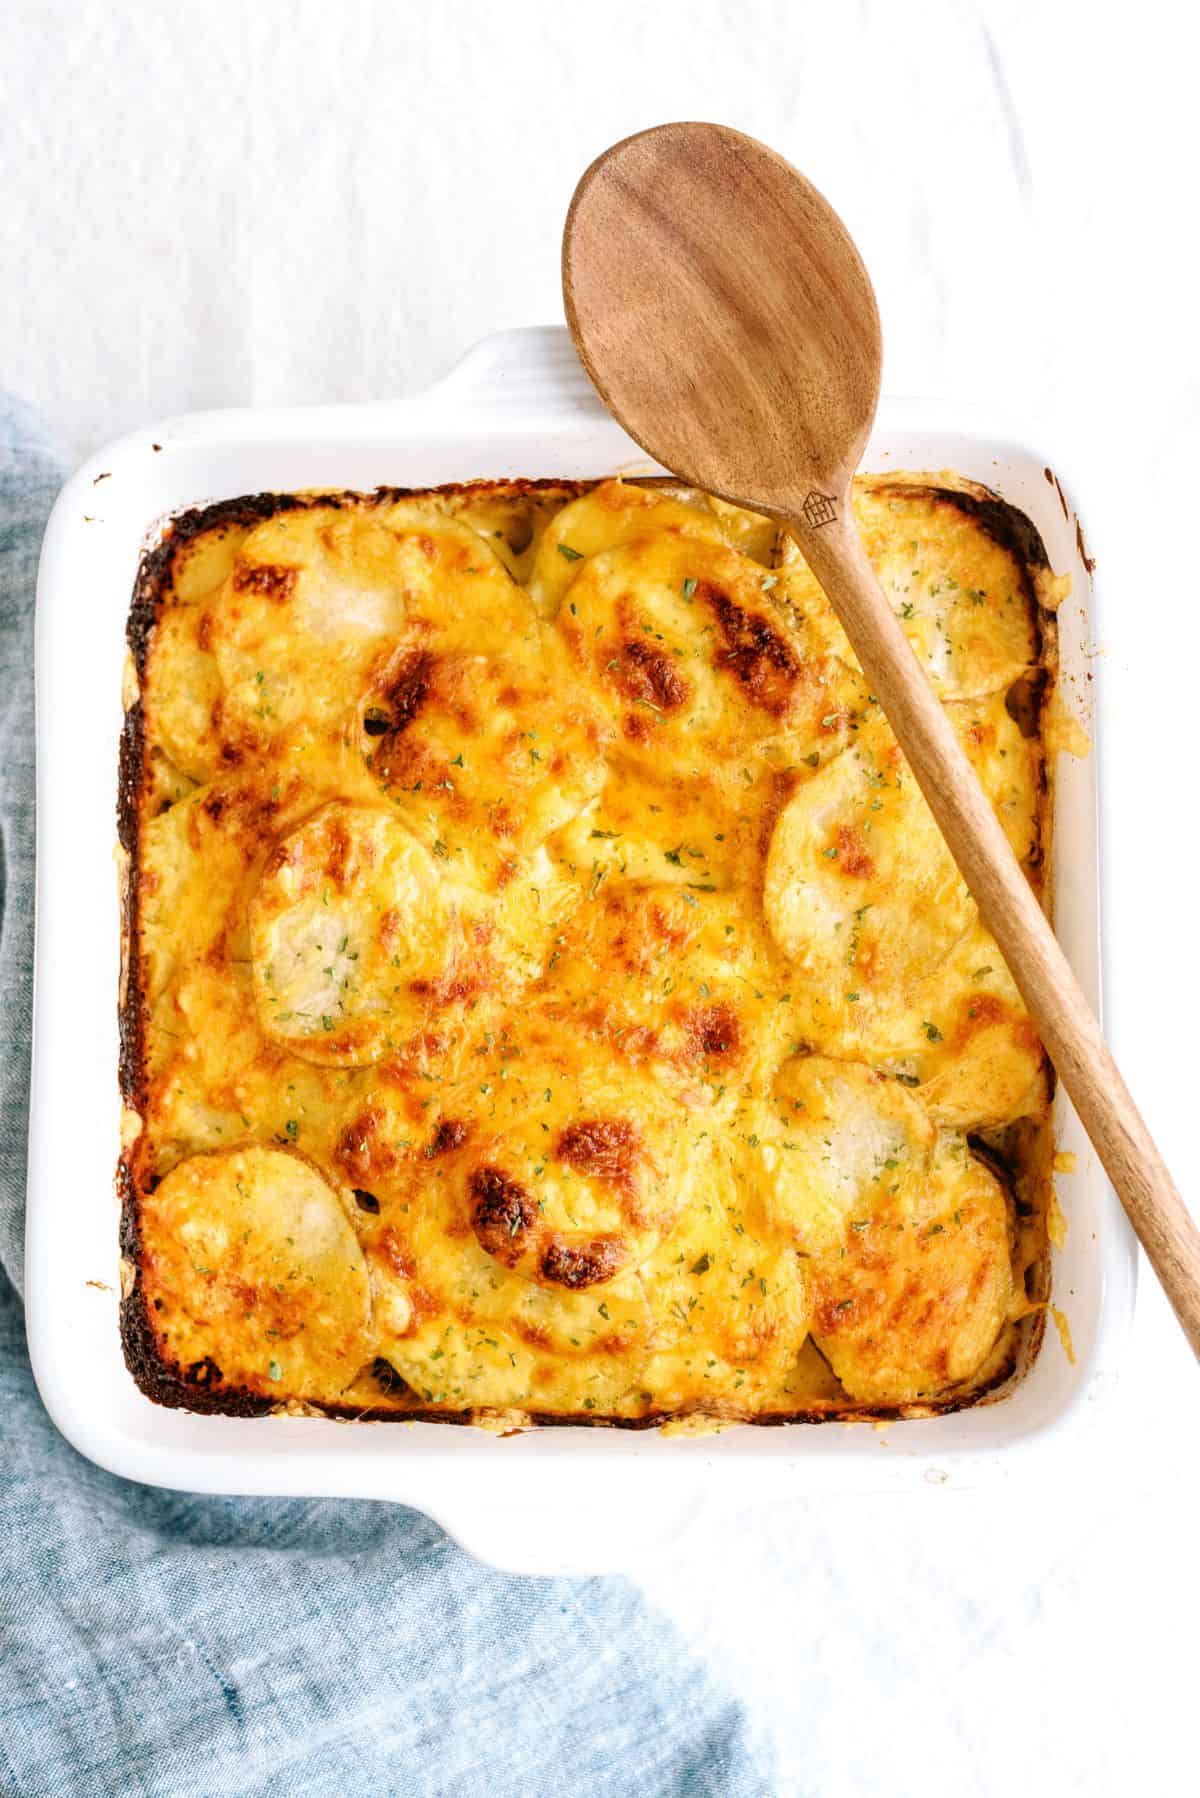 We Tested 4 Famous Scalloped Potato Recipes and Here's the Winner